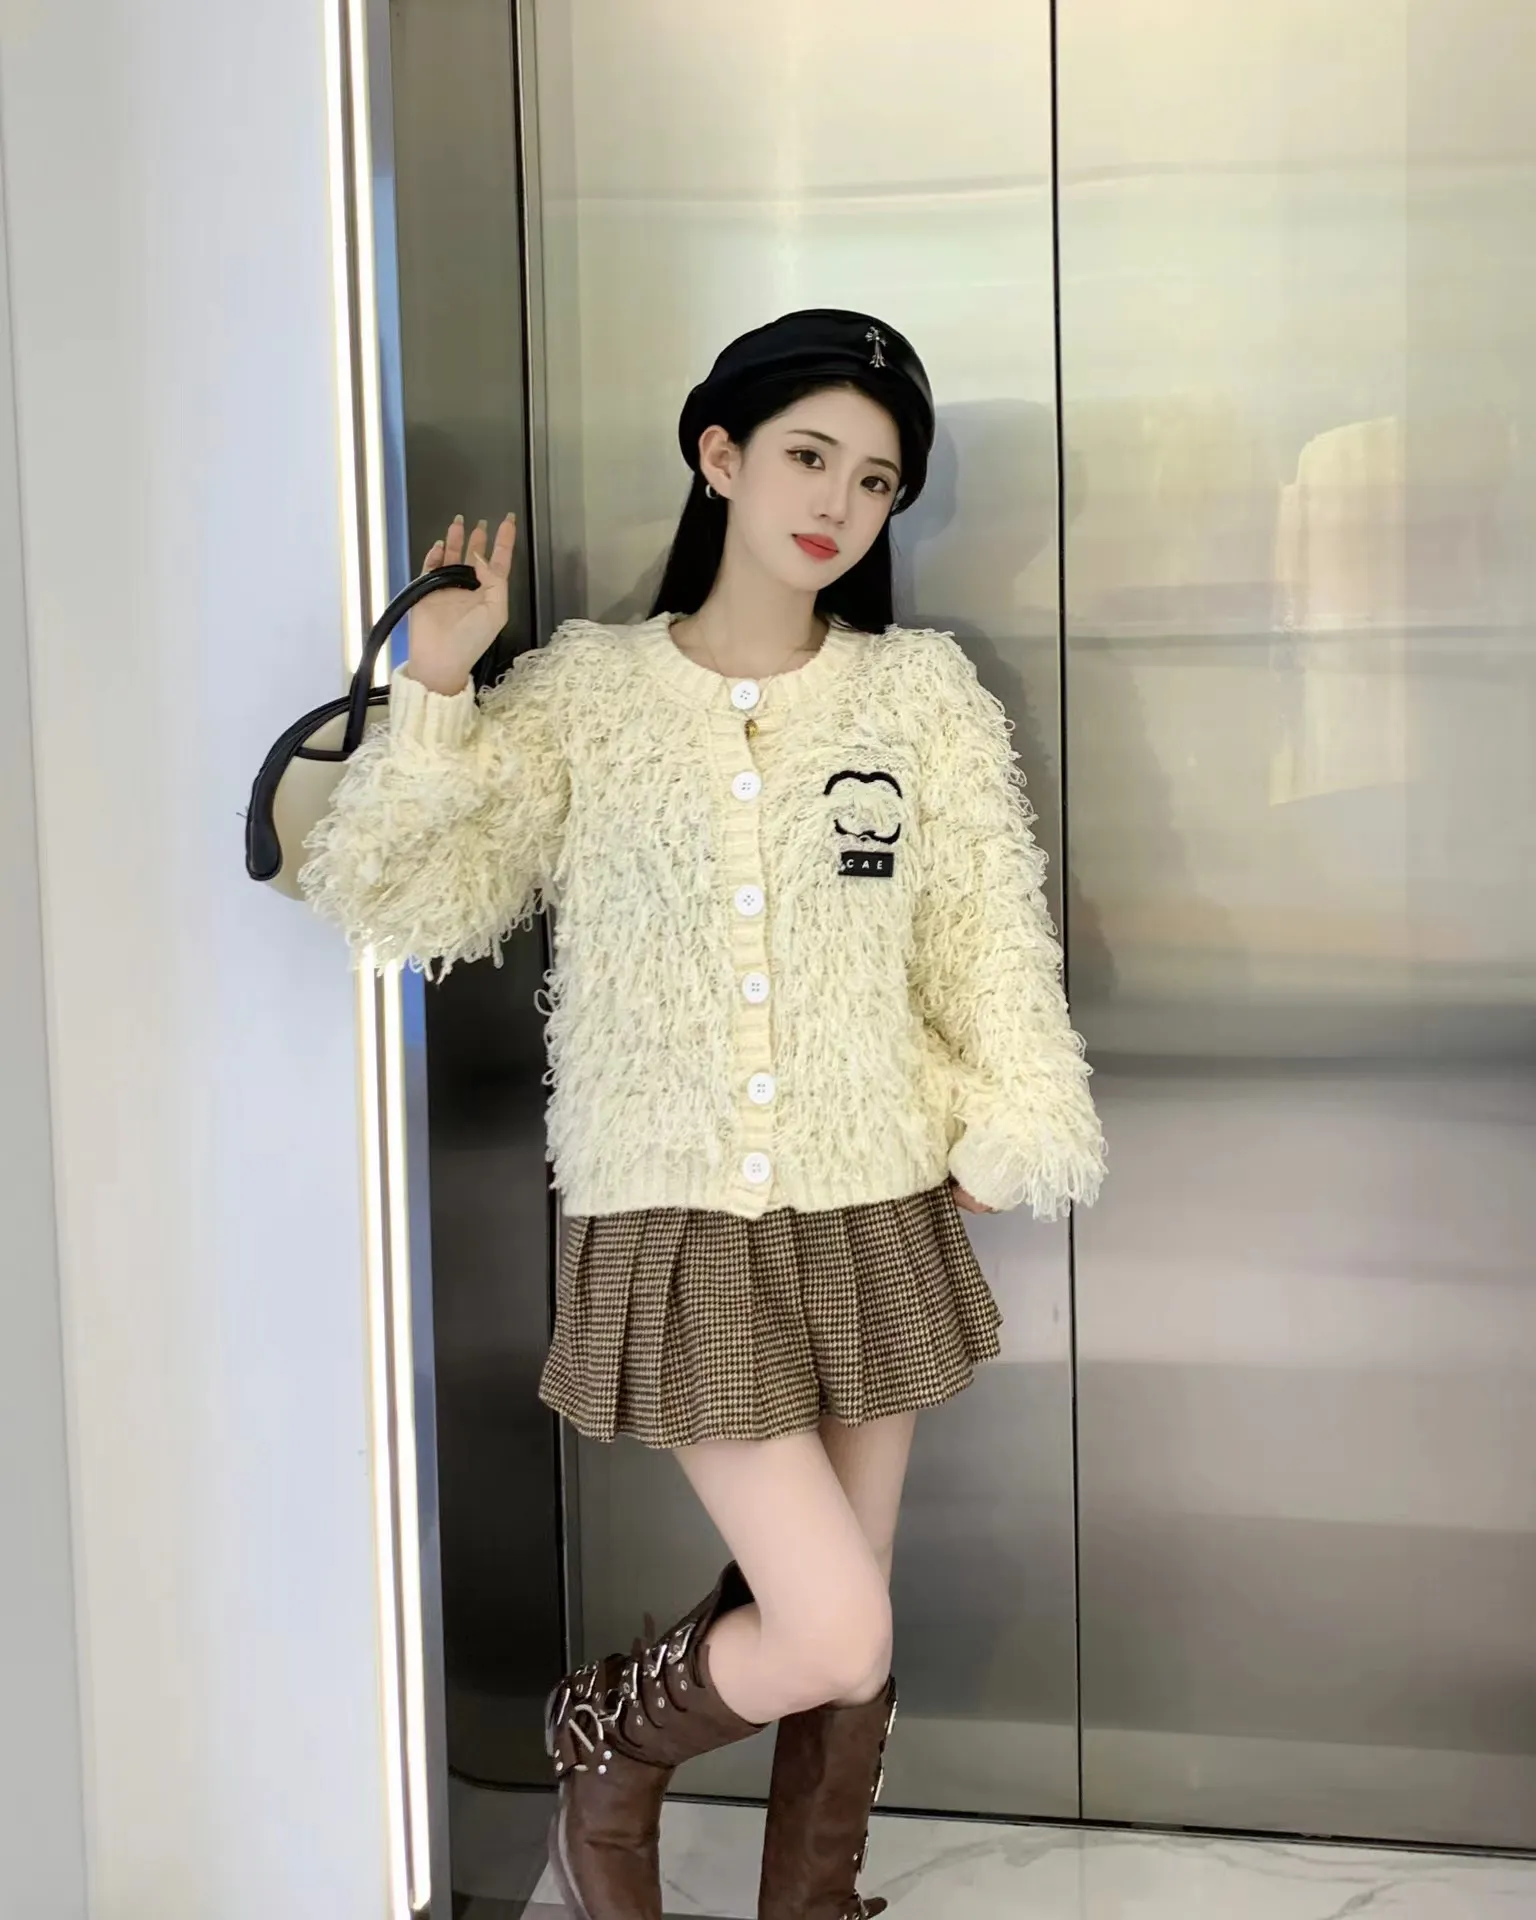 Women's Knits & Tees Woman Sweaters Fur Top Women Sweater Short Style For Lady Slim Jumpers Shirt Design S-L